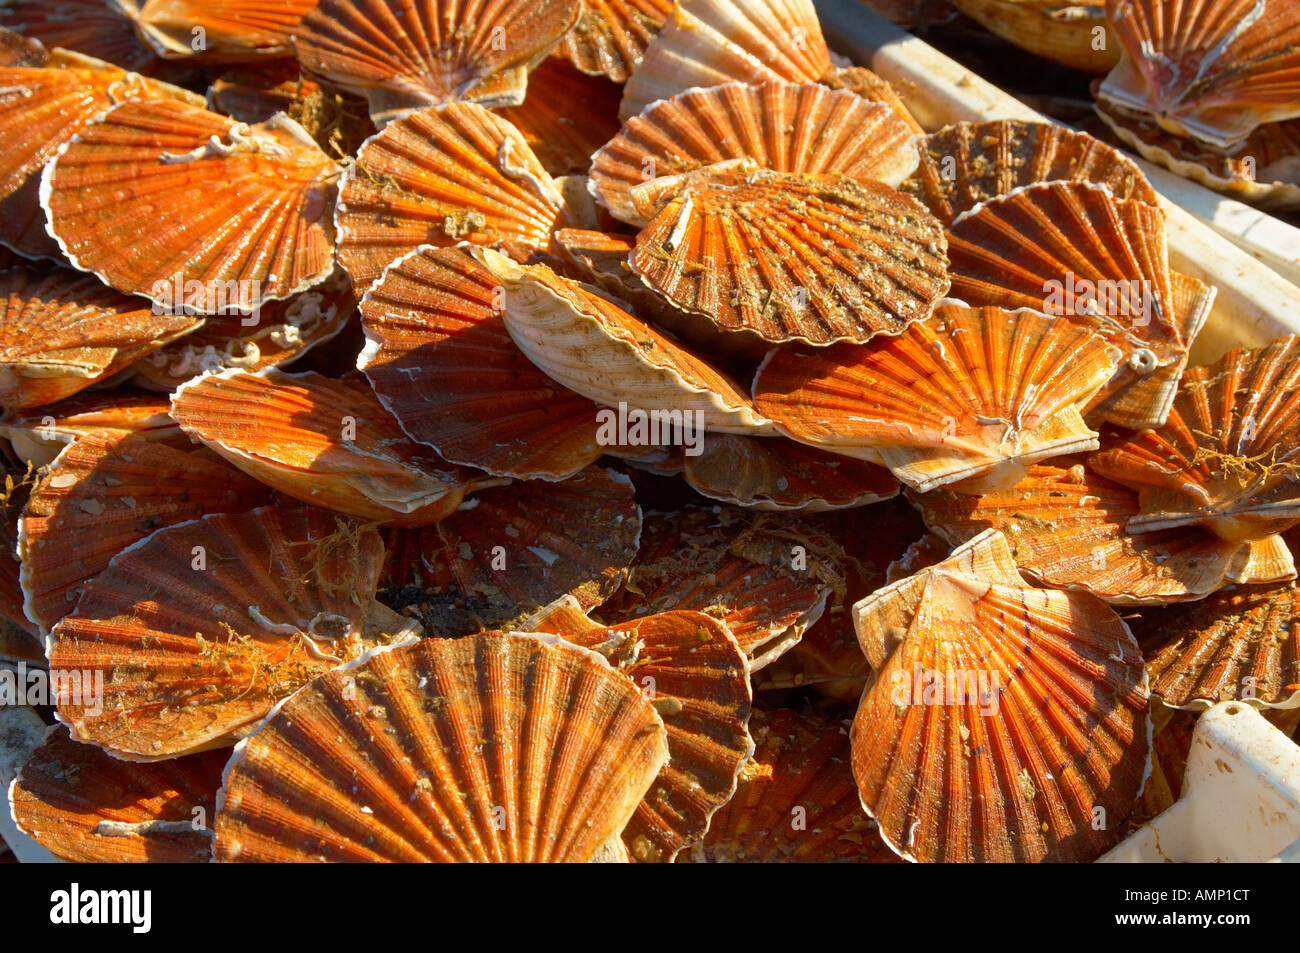 Scallops being landed off a fishing boat Honfleur France Stock Photo